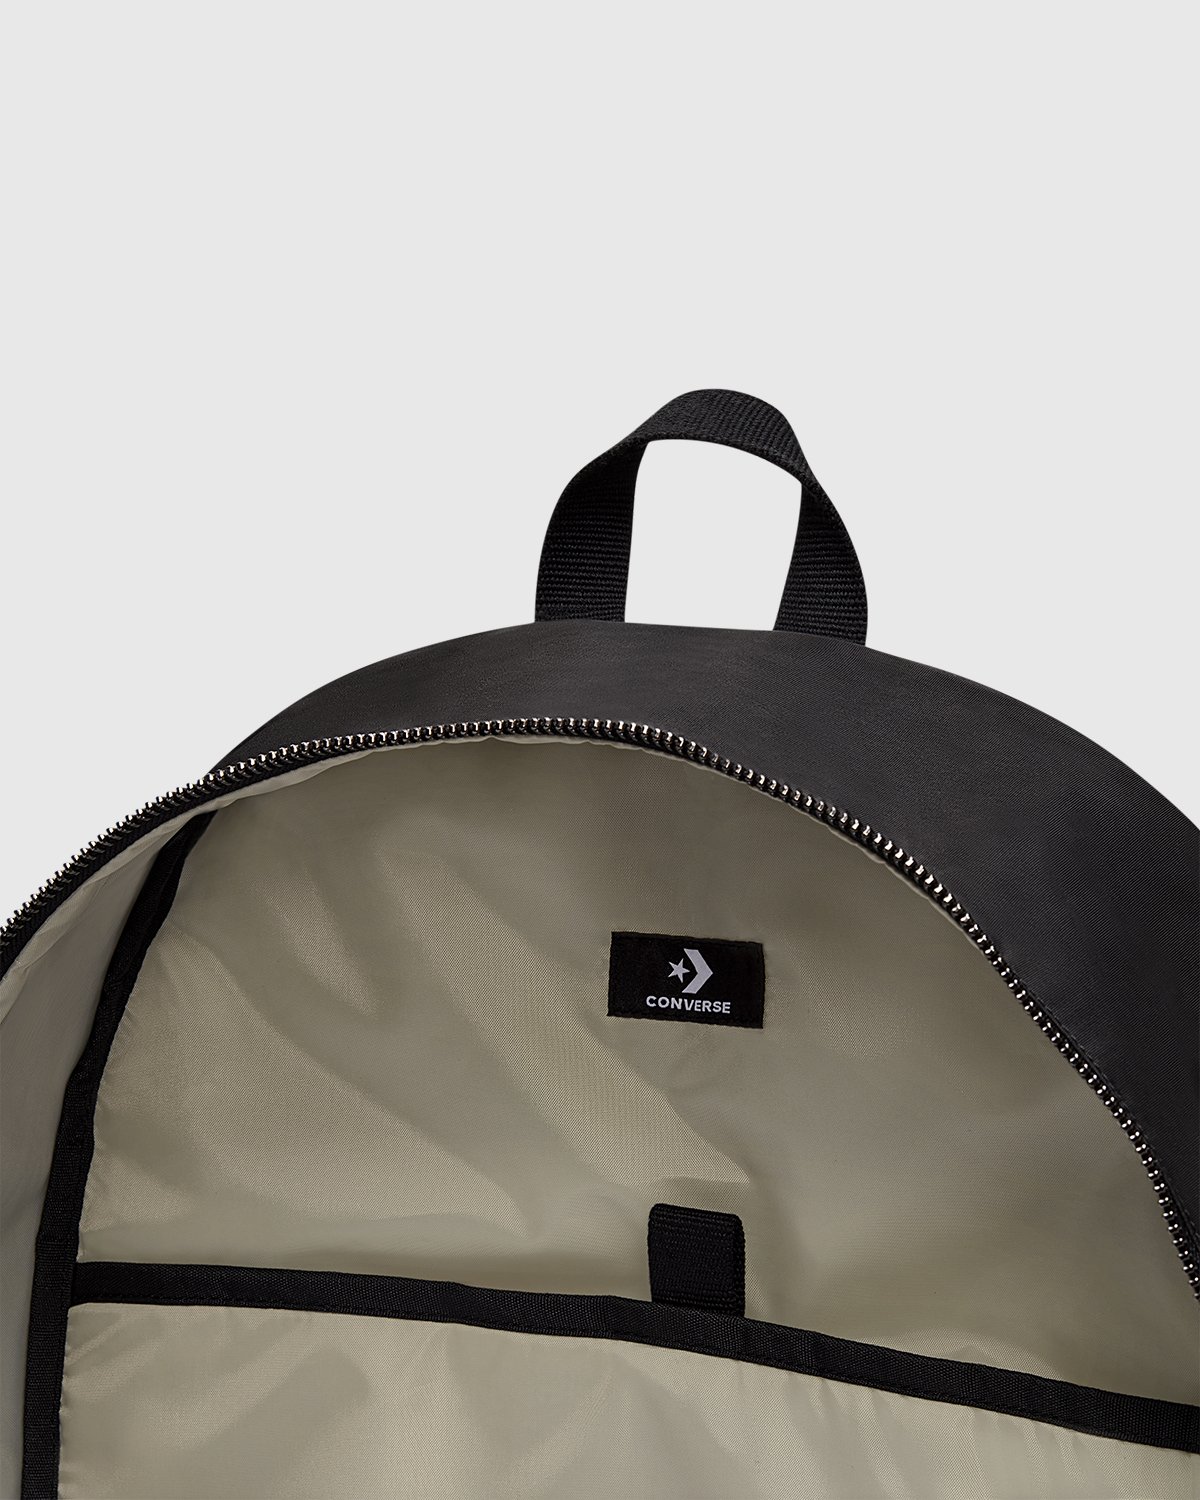 Converse x Rick Owens - Oversized Backpack Black - Accessories - Black - Image 4